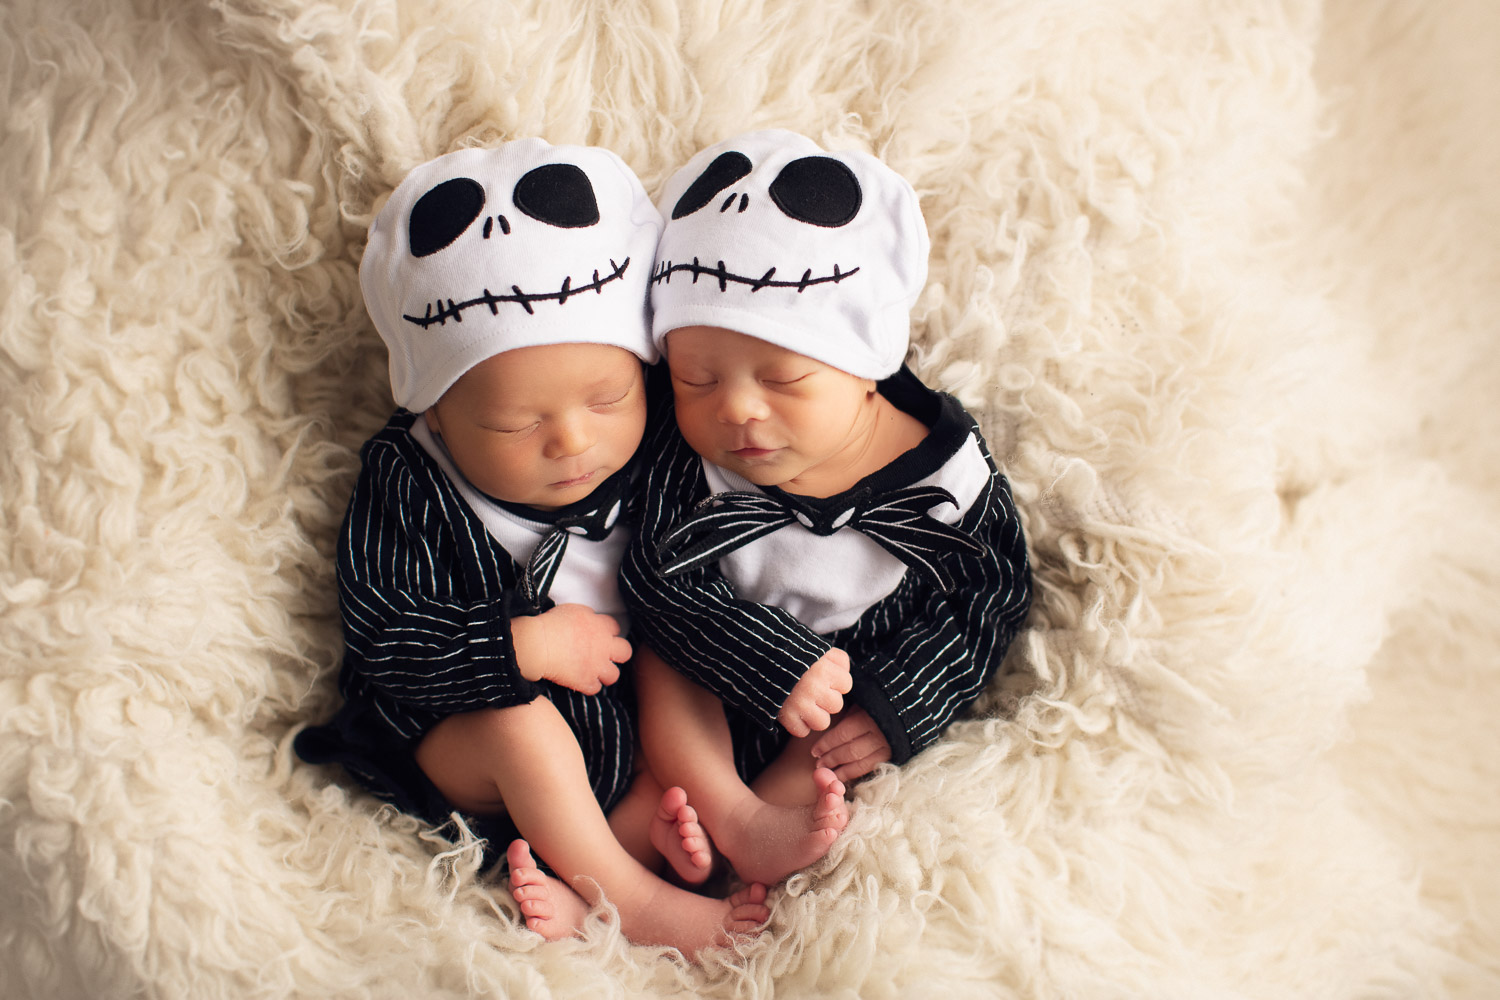 vancouver baby photography - twins